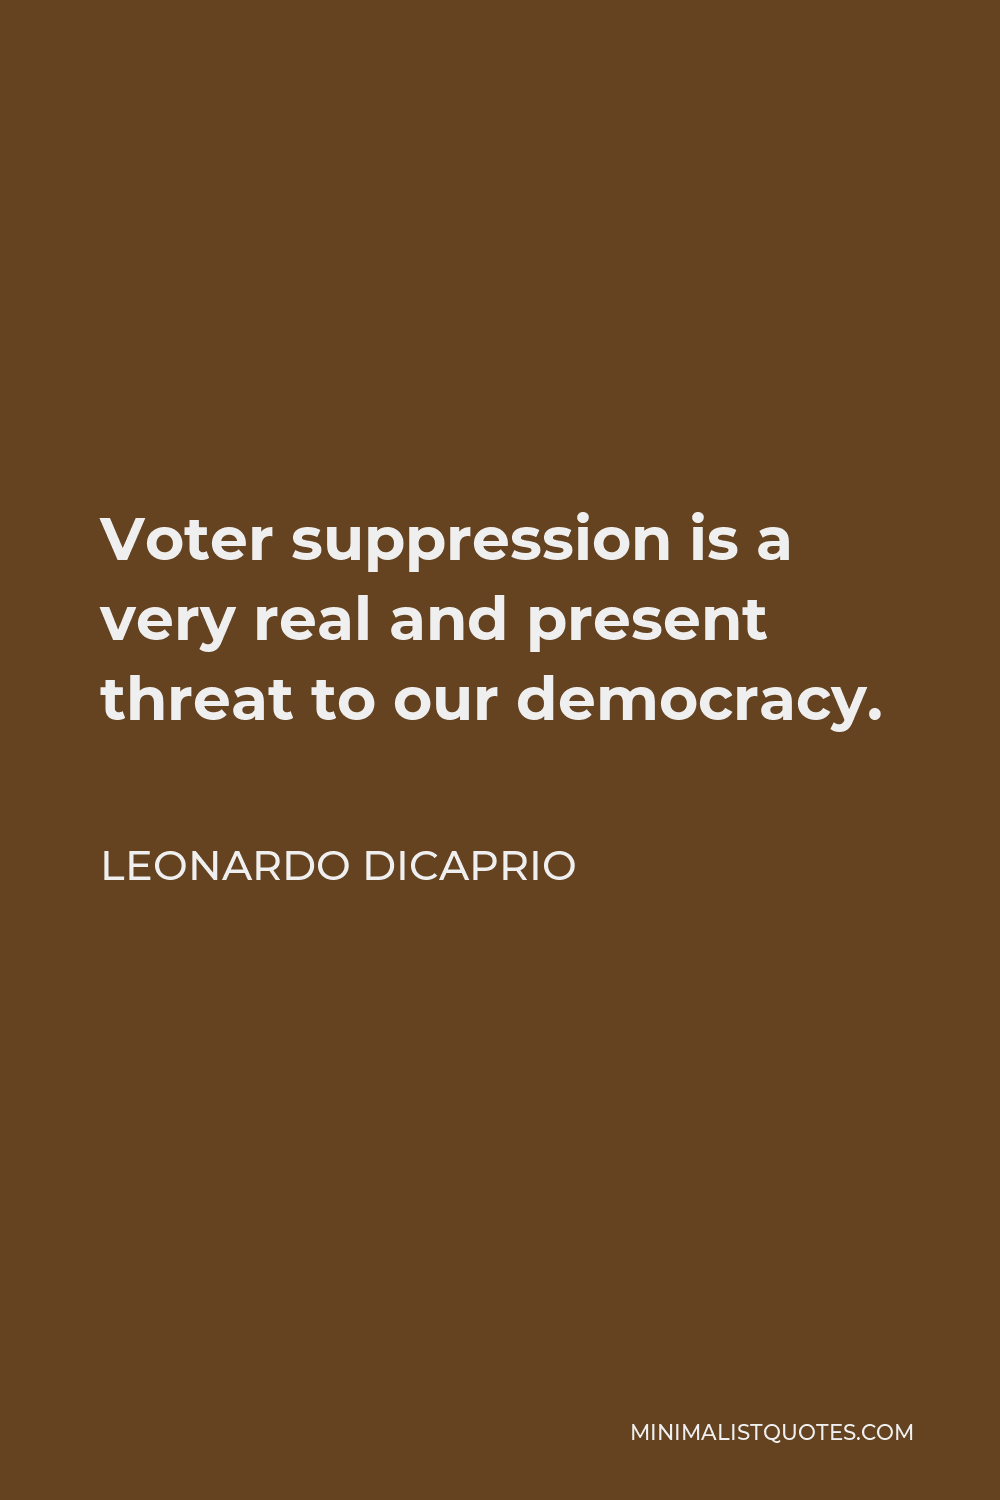 Leonardo DiCaprio Quote - Voter suppression is a very real and present threat to our democracy.